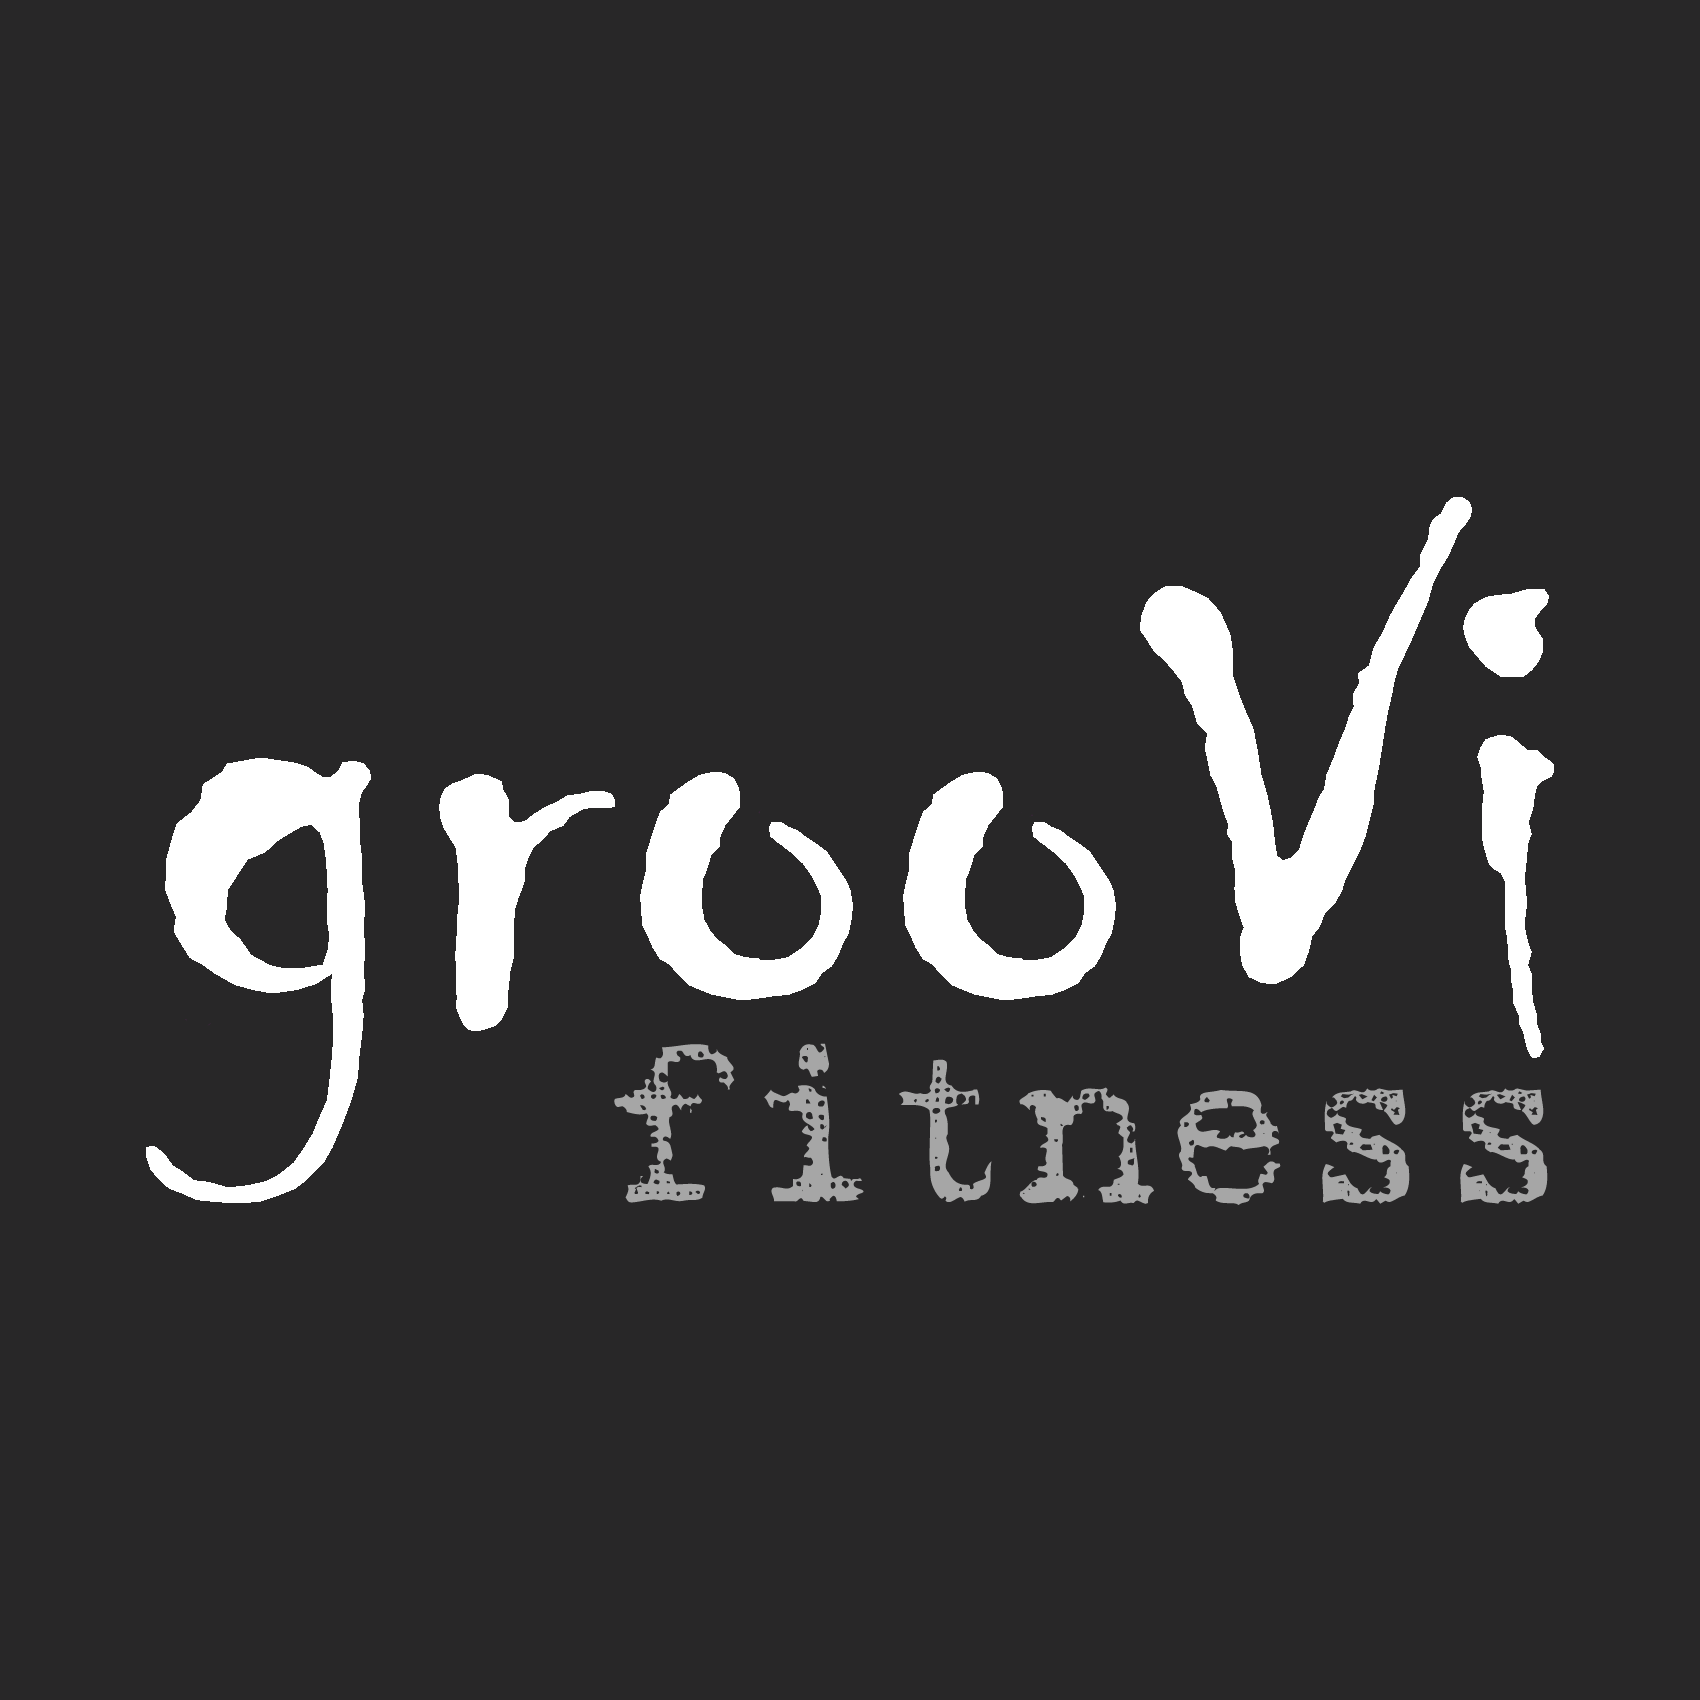 grooVi - more than fitness.